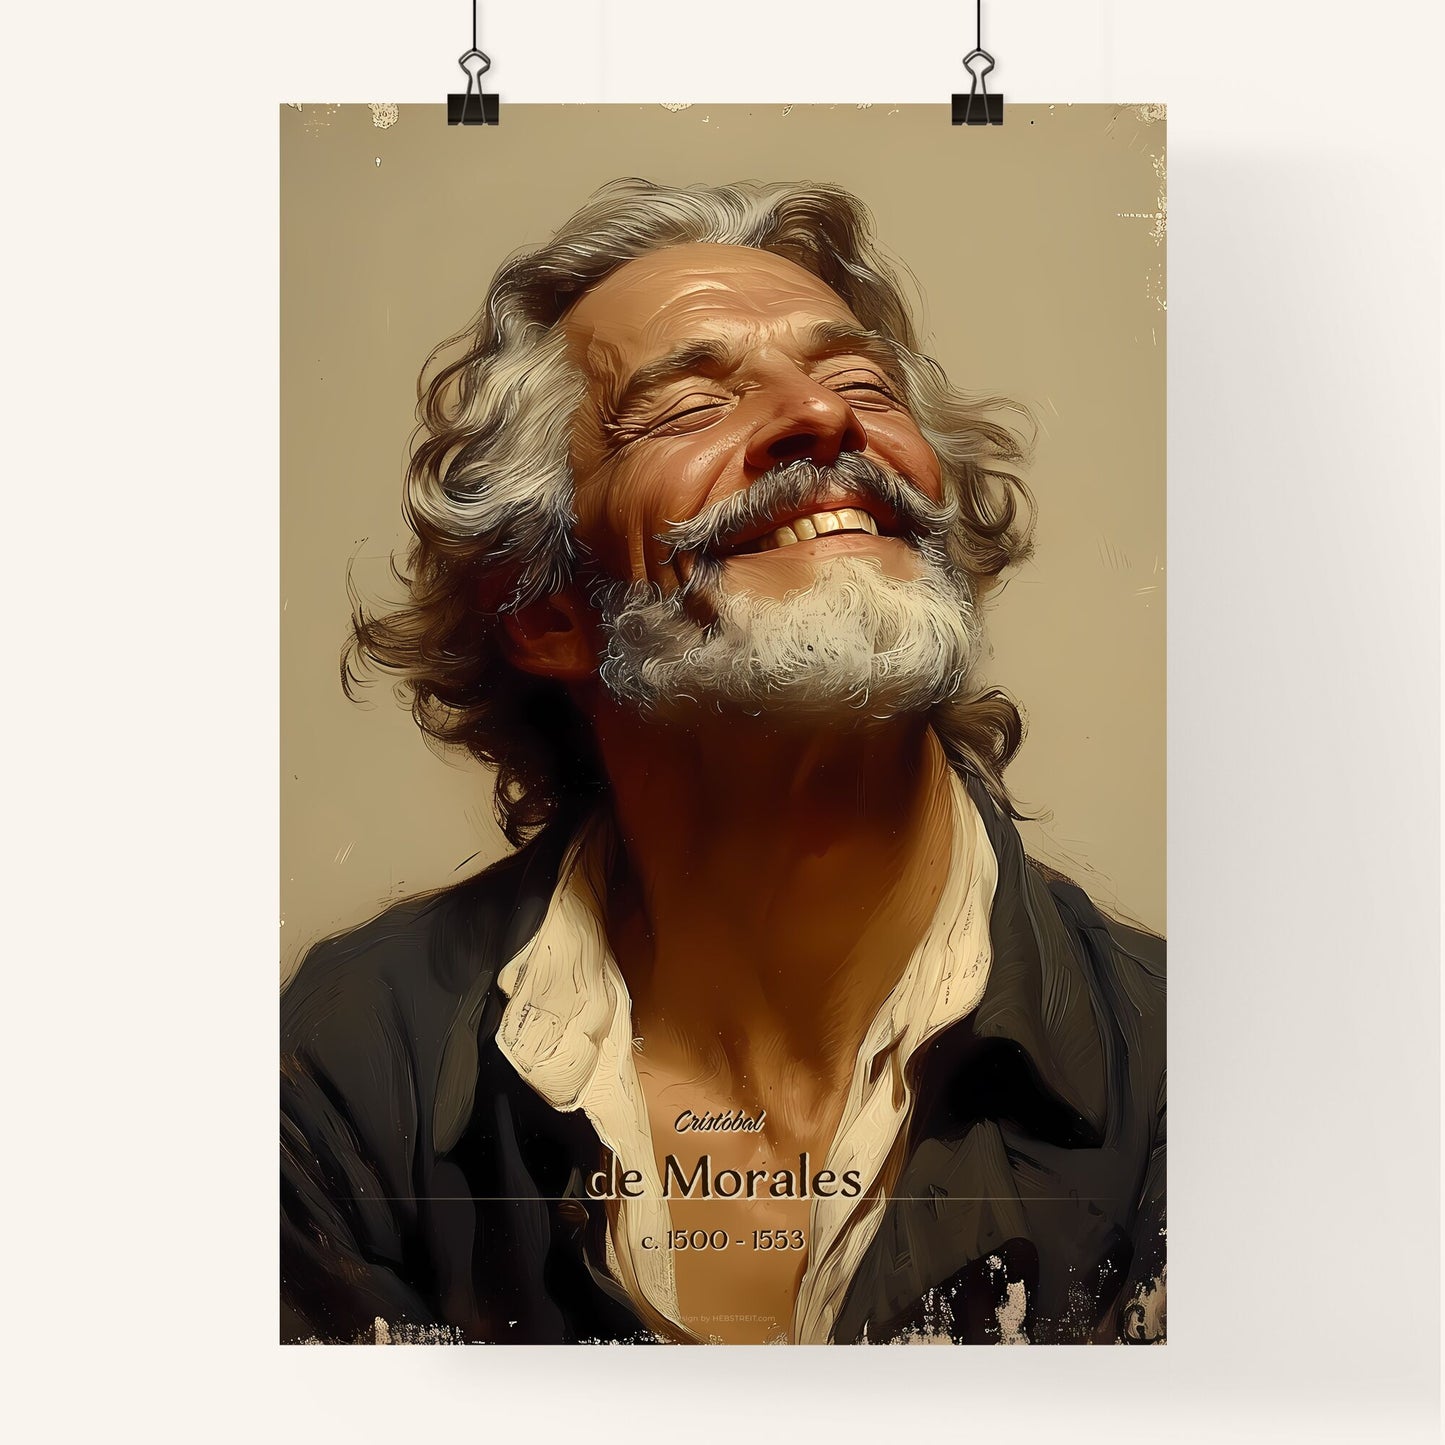 Cristóbal, de Morales, c. 1500 - 1553, A Poster of a man with white hair and beard laughing Default Title